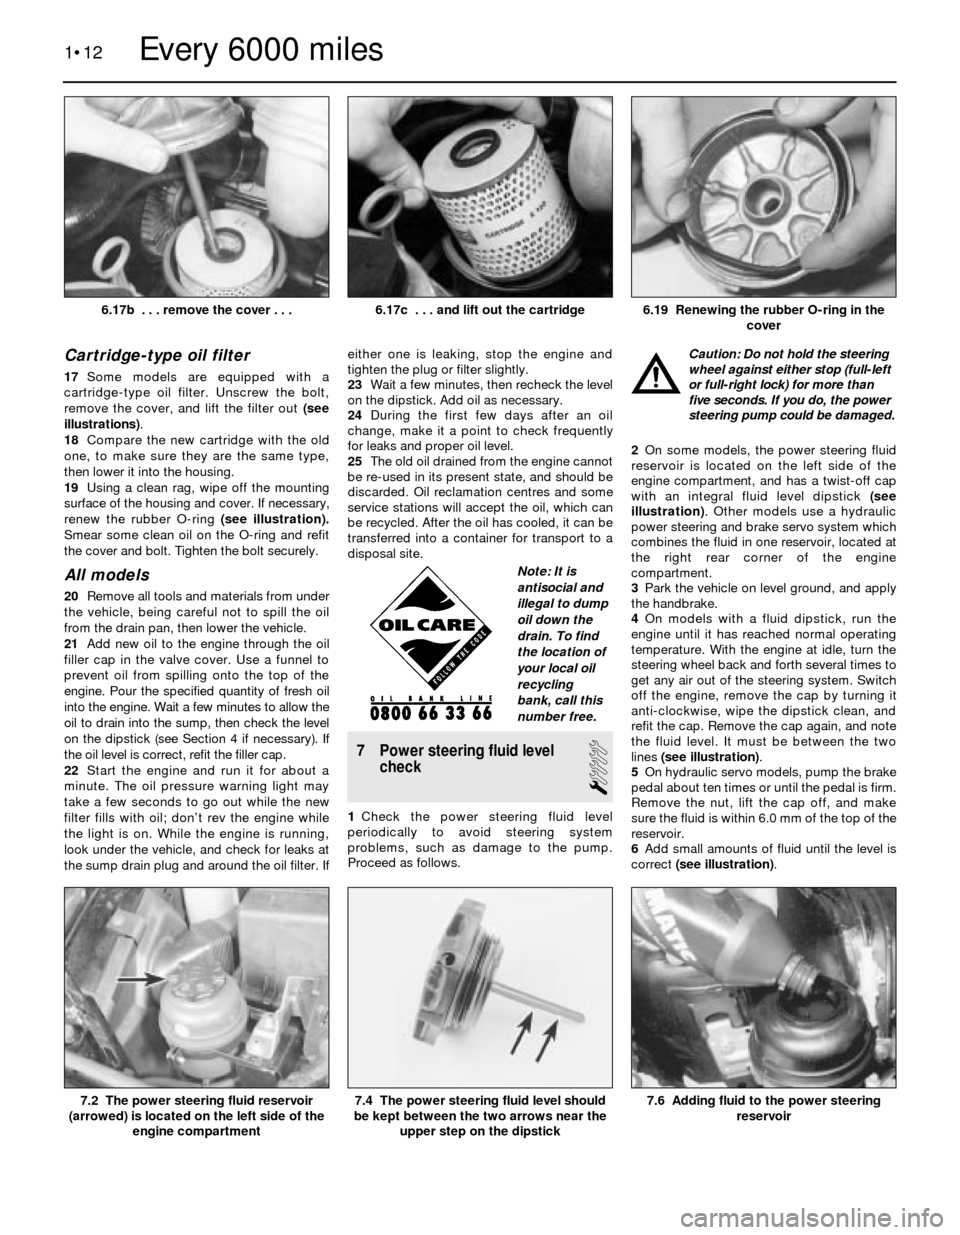 BMW 5 SERIES 1989 E34 Workshop Manual Cartridge-type oil filter
17Some models are equipped with a
cartridge-type oil filter. Unscrew the bolt,
remove the cover, and lift the filter out (see
illustrations).
18Compare the new cartridge with